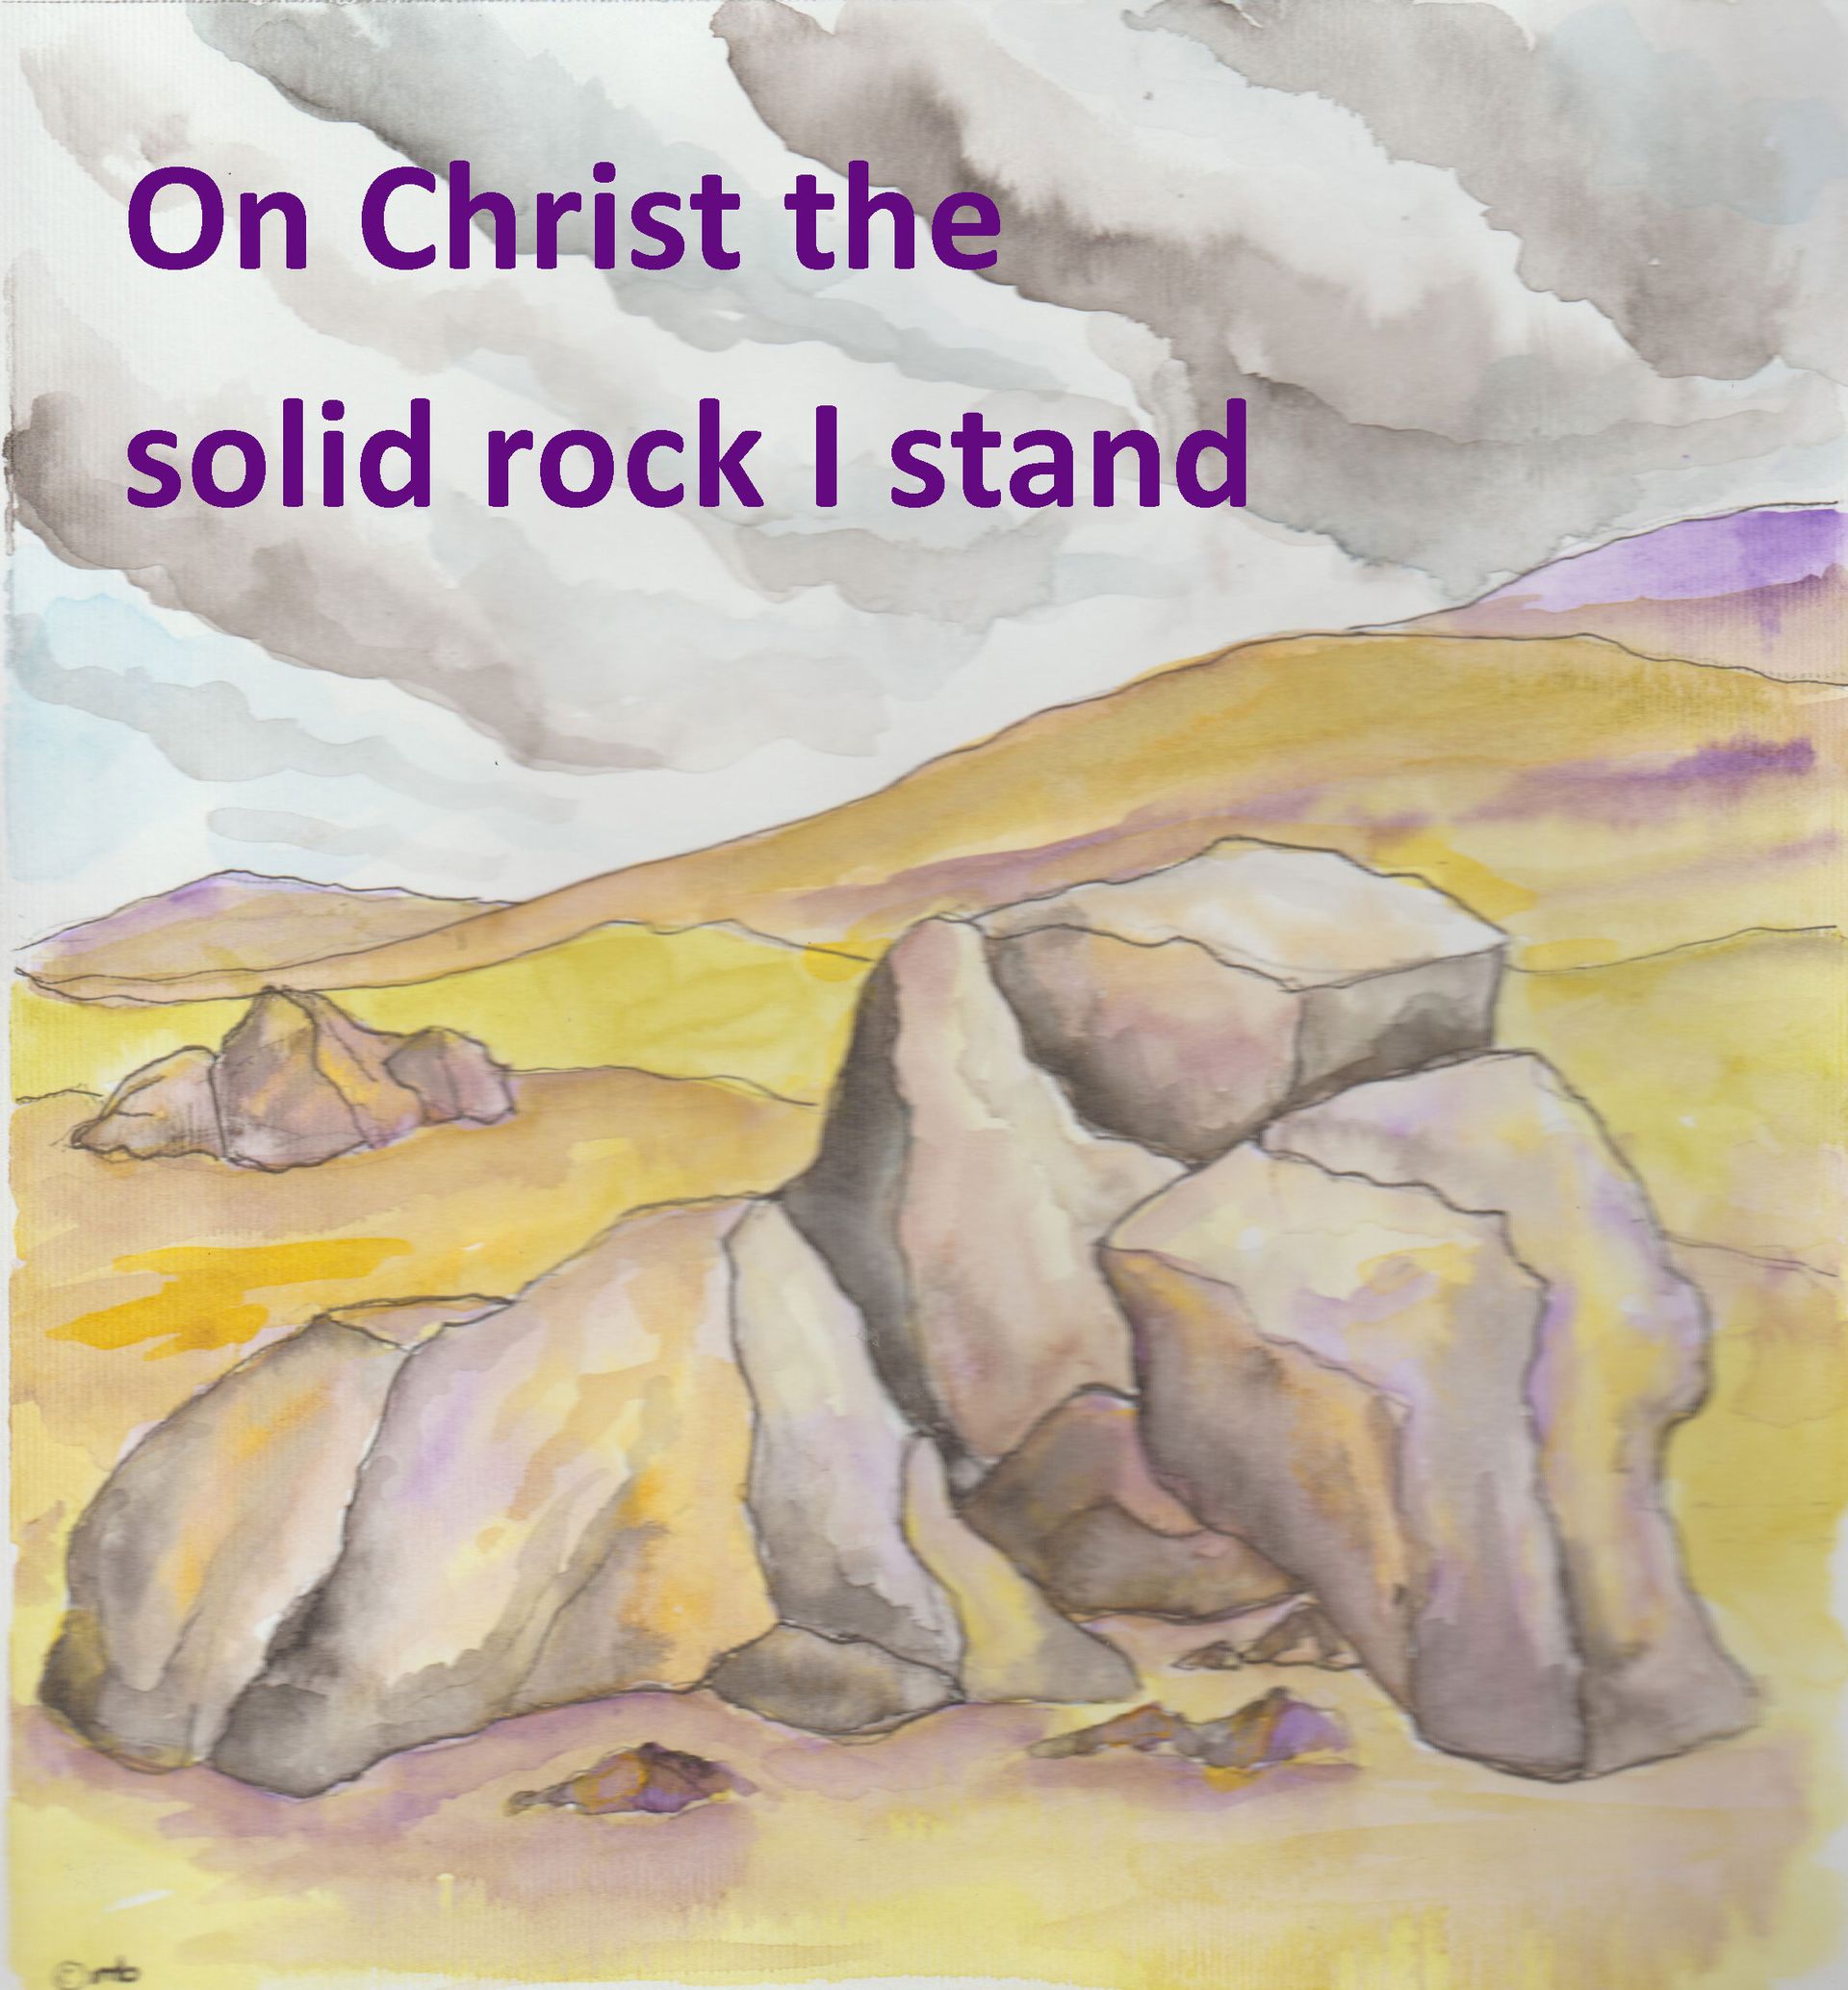 Christ the rock on which I stand 